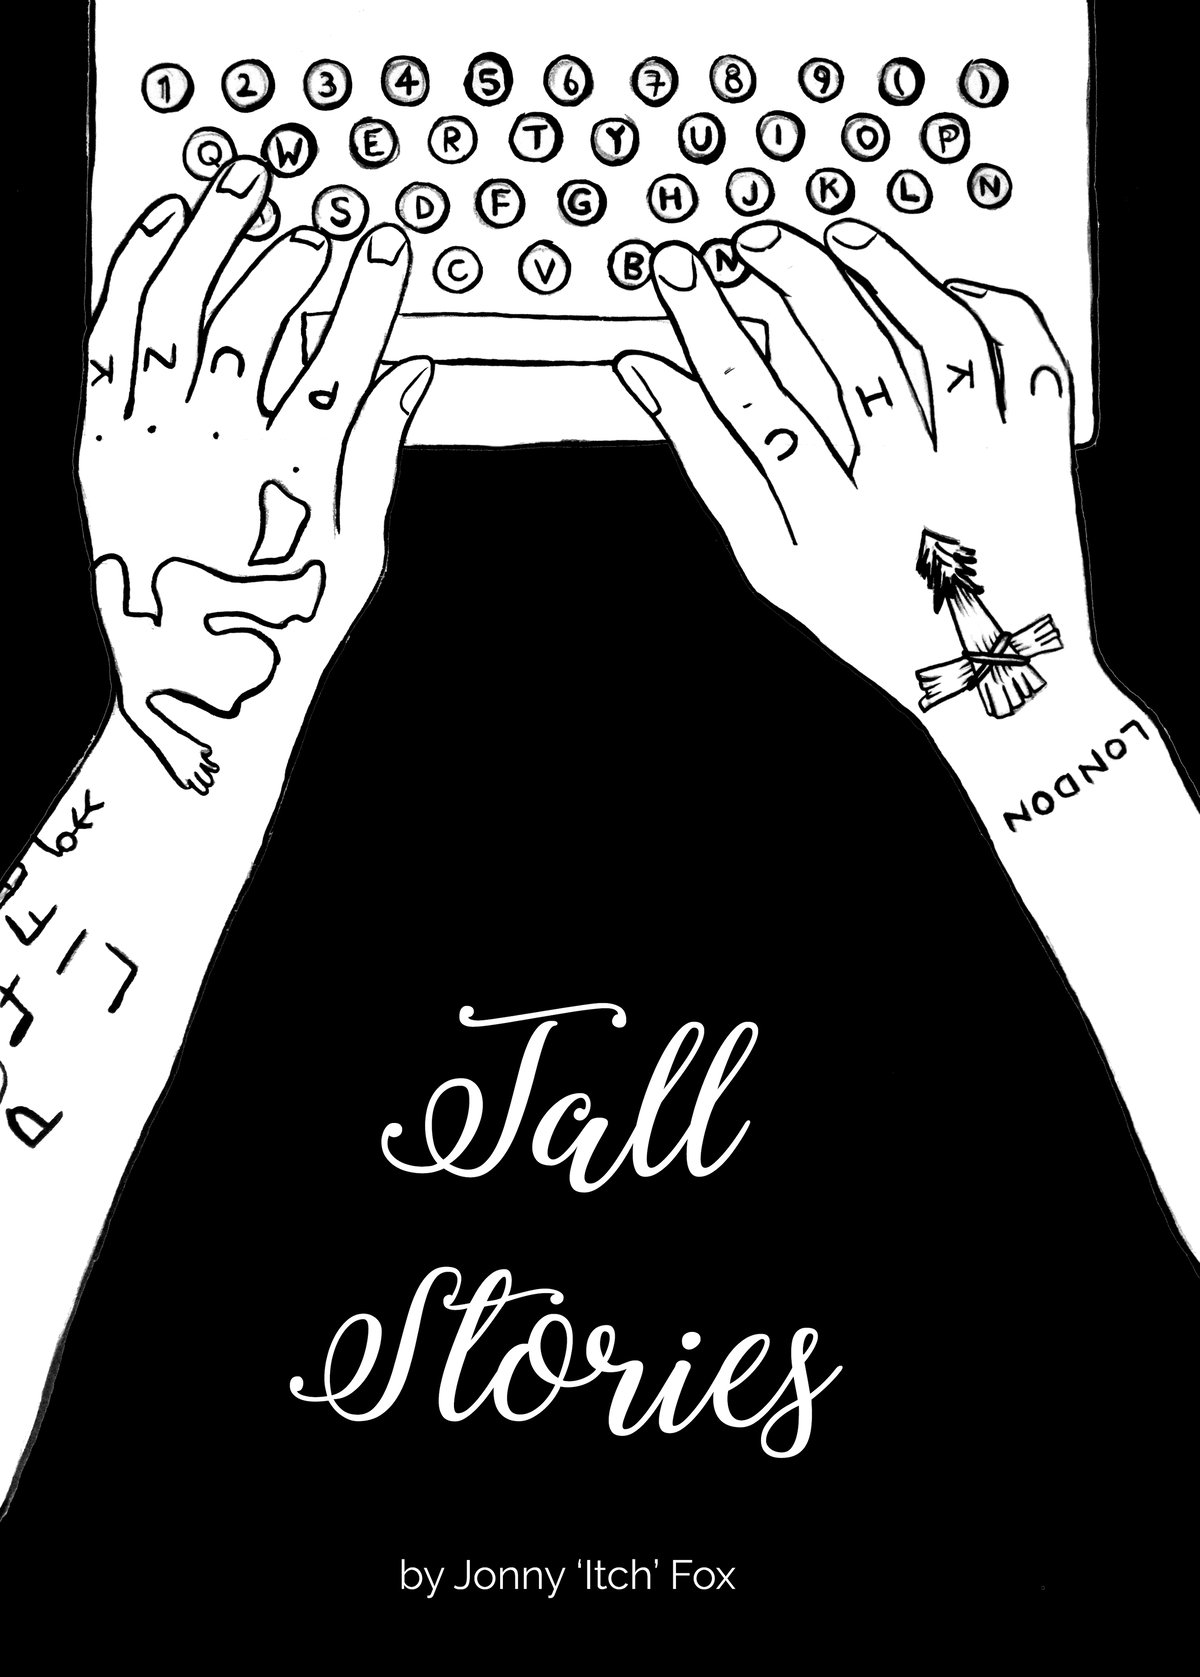 Image of "Tall Stories" Book